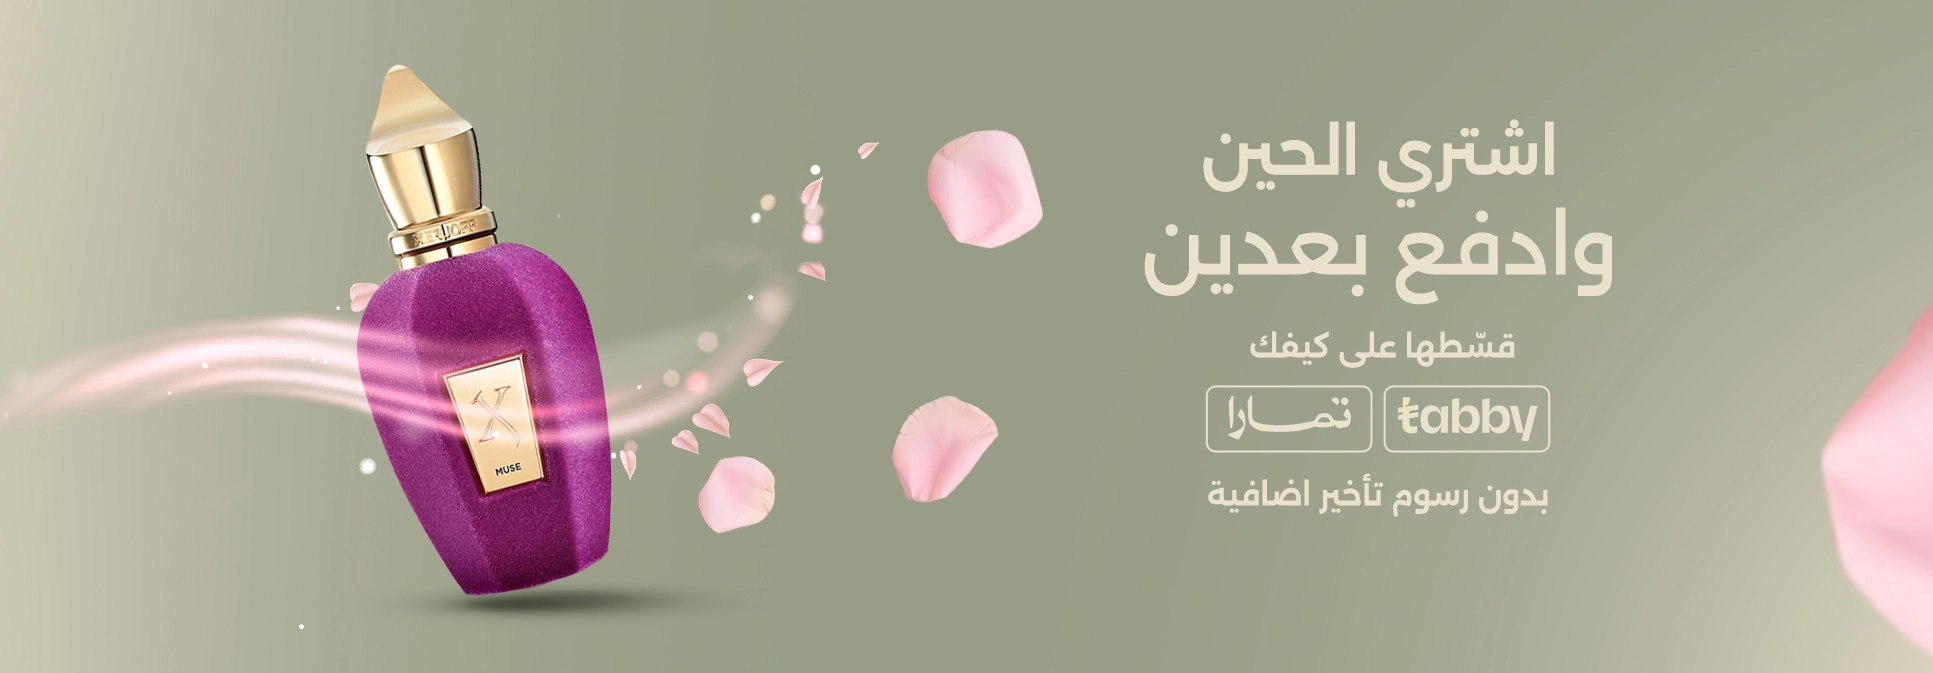 Luxurious Fragrances Available perfumes in Saudi Arabia - Discover Your Signature Scent